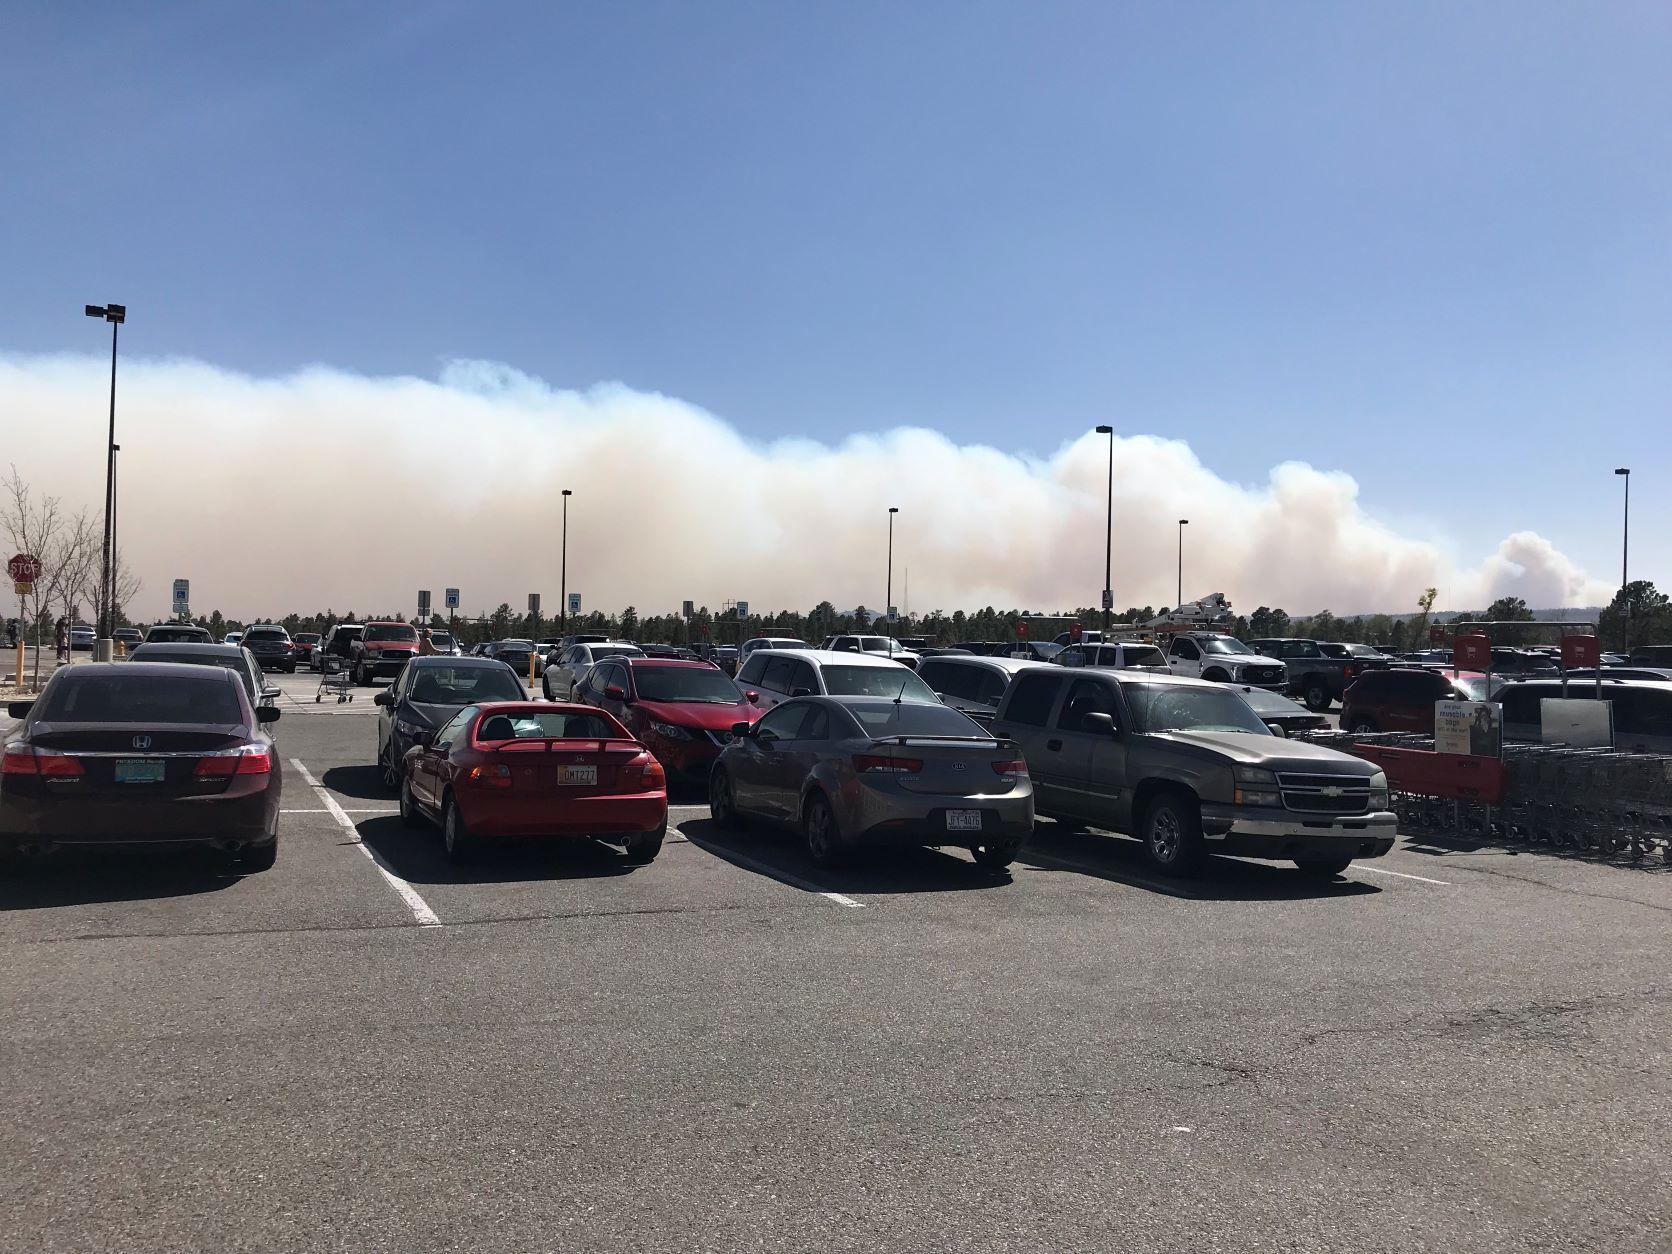 Looking across a parking lot at smoke from the fire